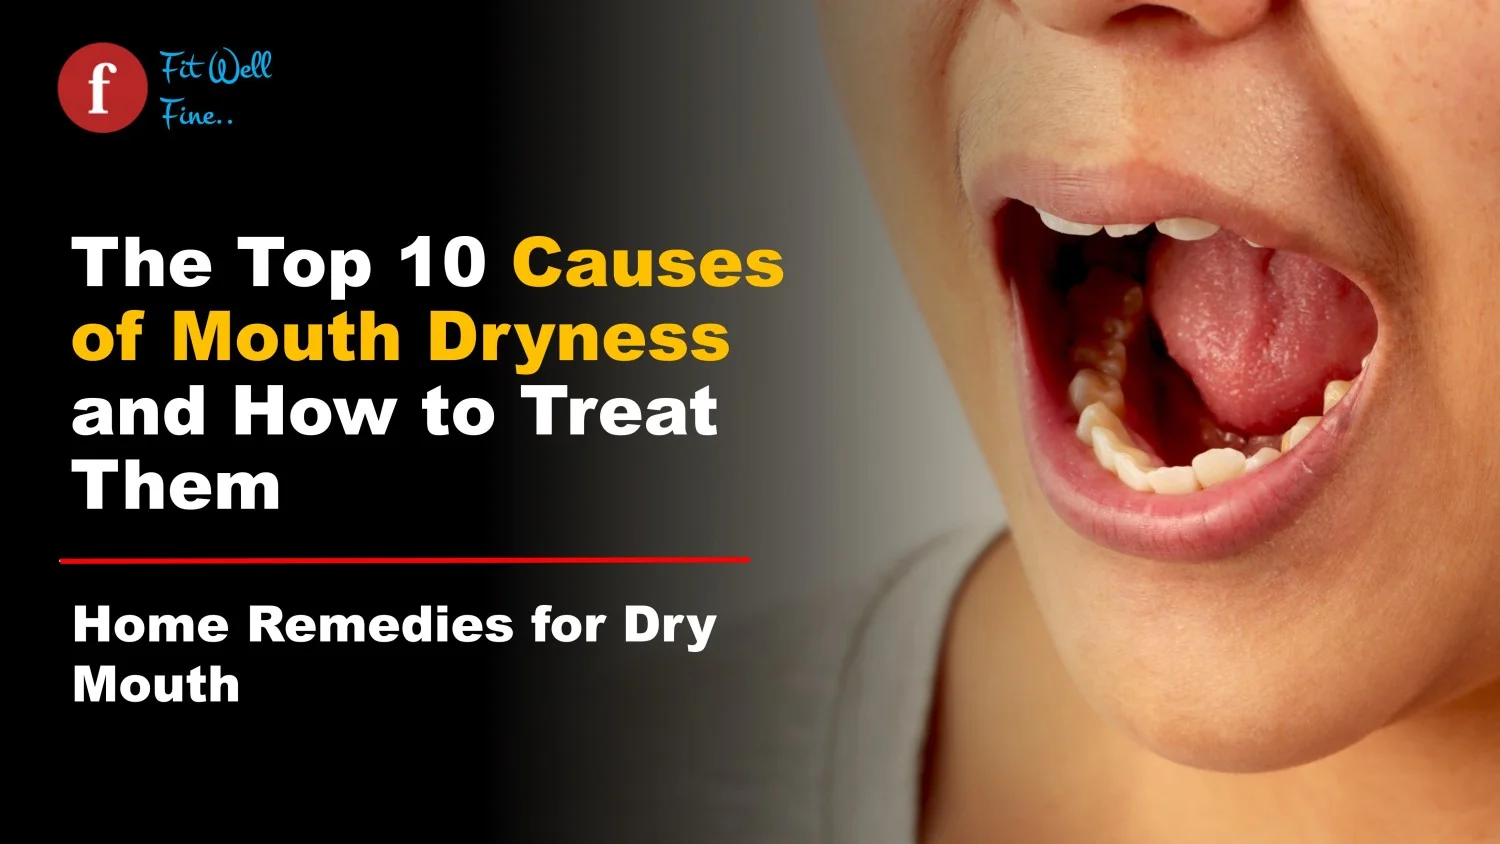 Causes of Mouth Dryness